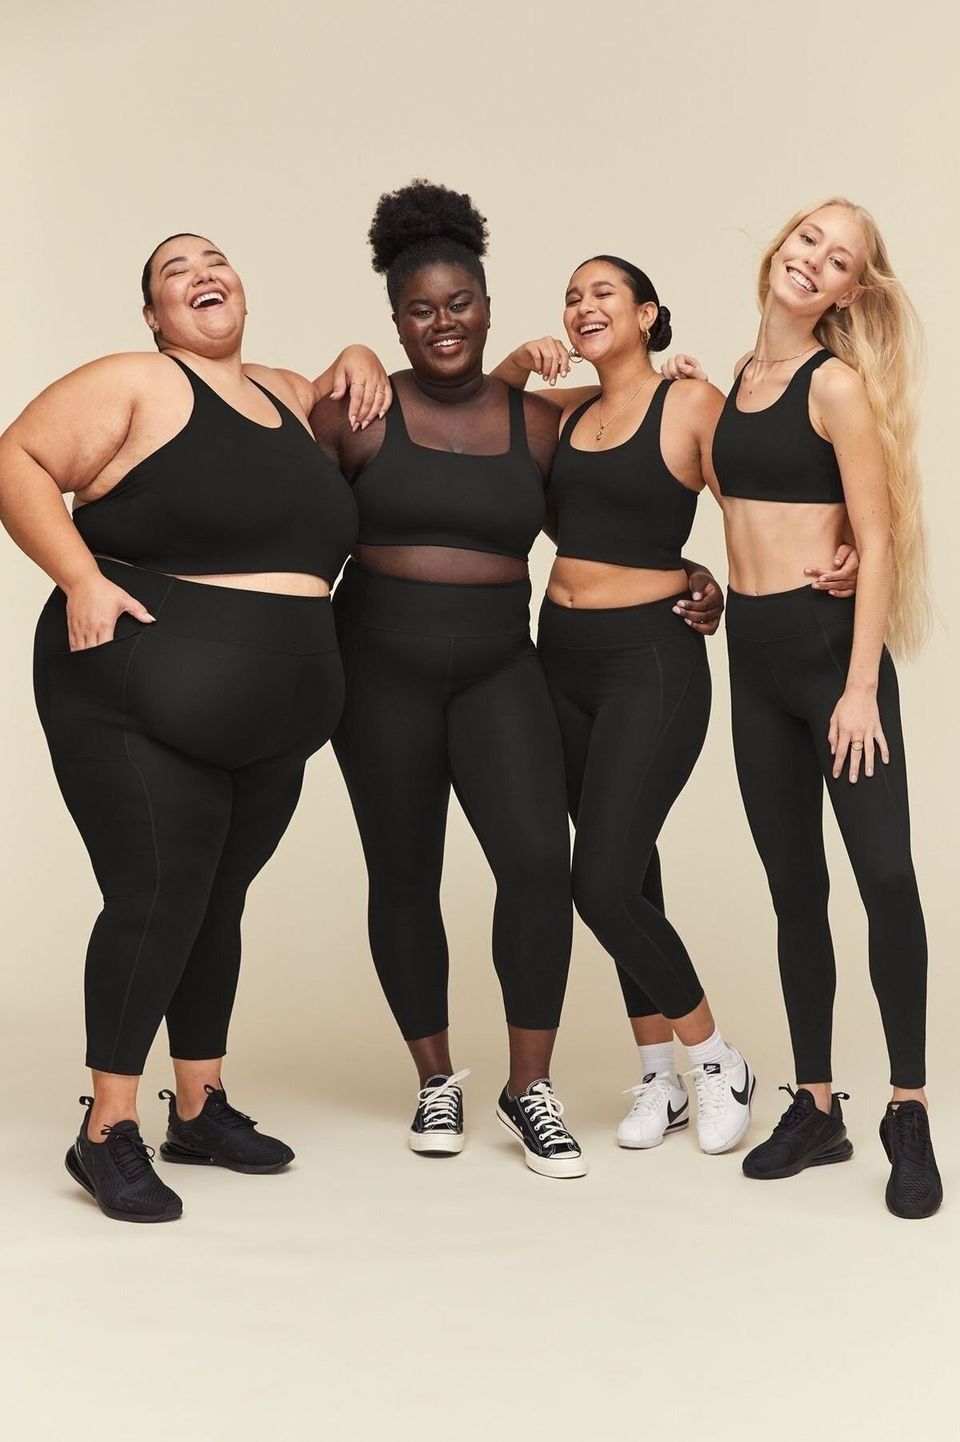 Among the products that made the cut are the iconic compressive pocket leggings from Girlfriend Collective — and we're ecstatic to announce that they're currently on sale for 20% off.